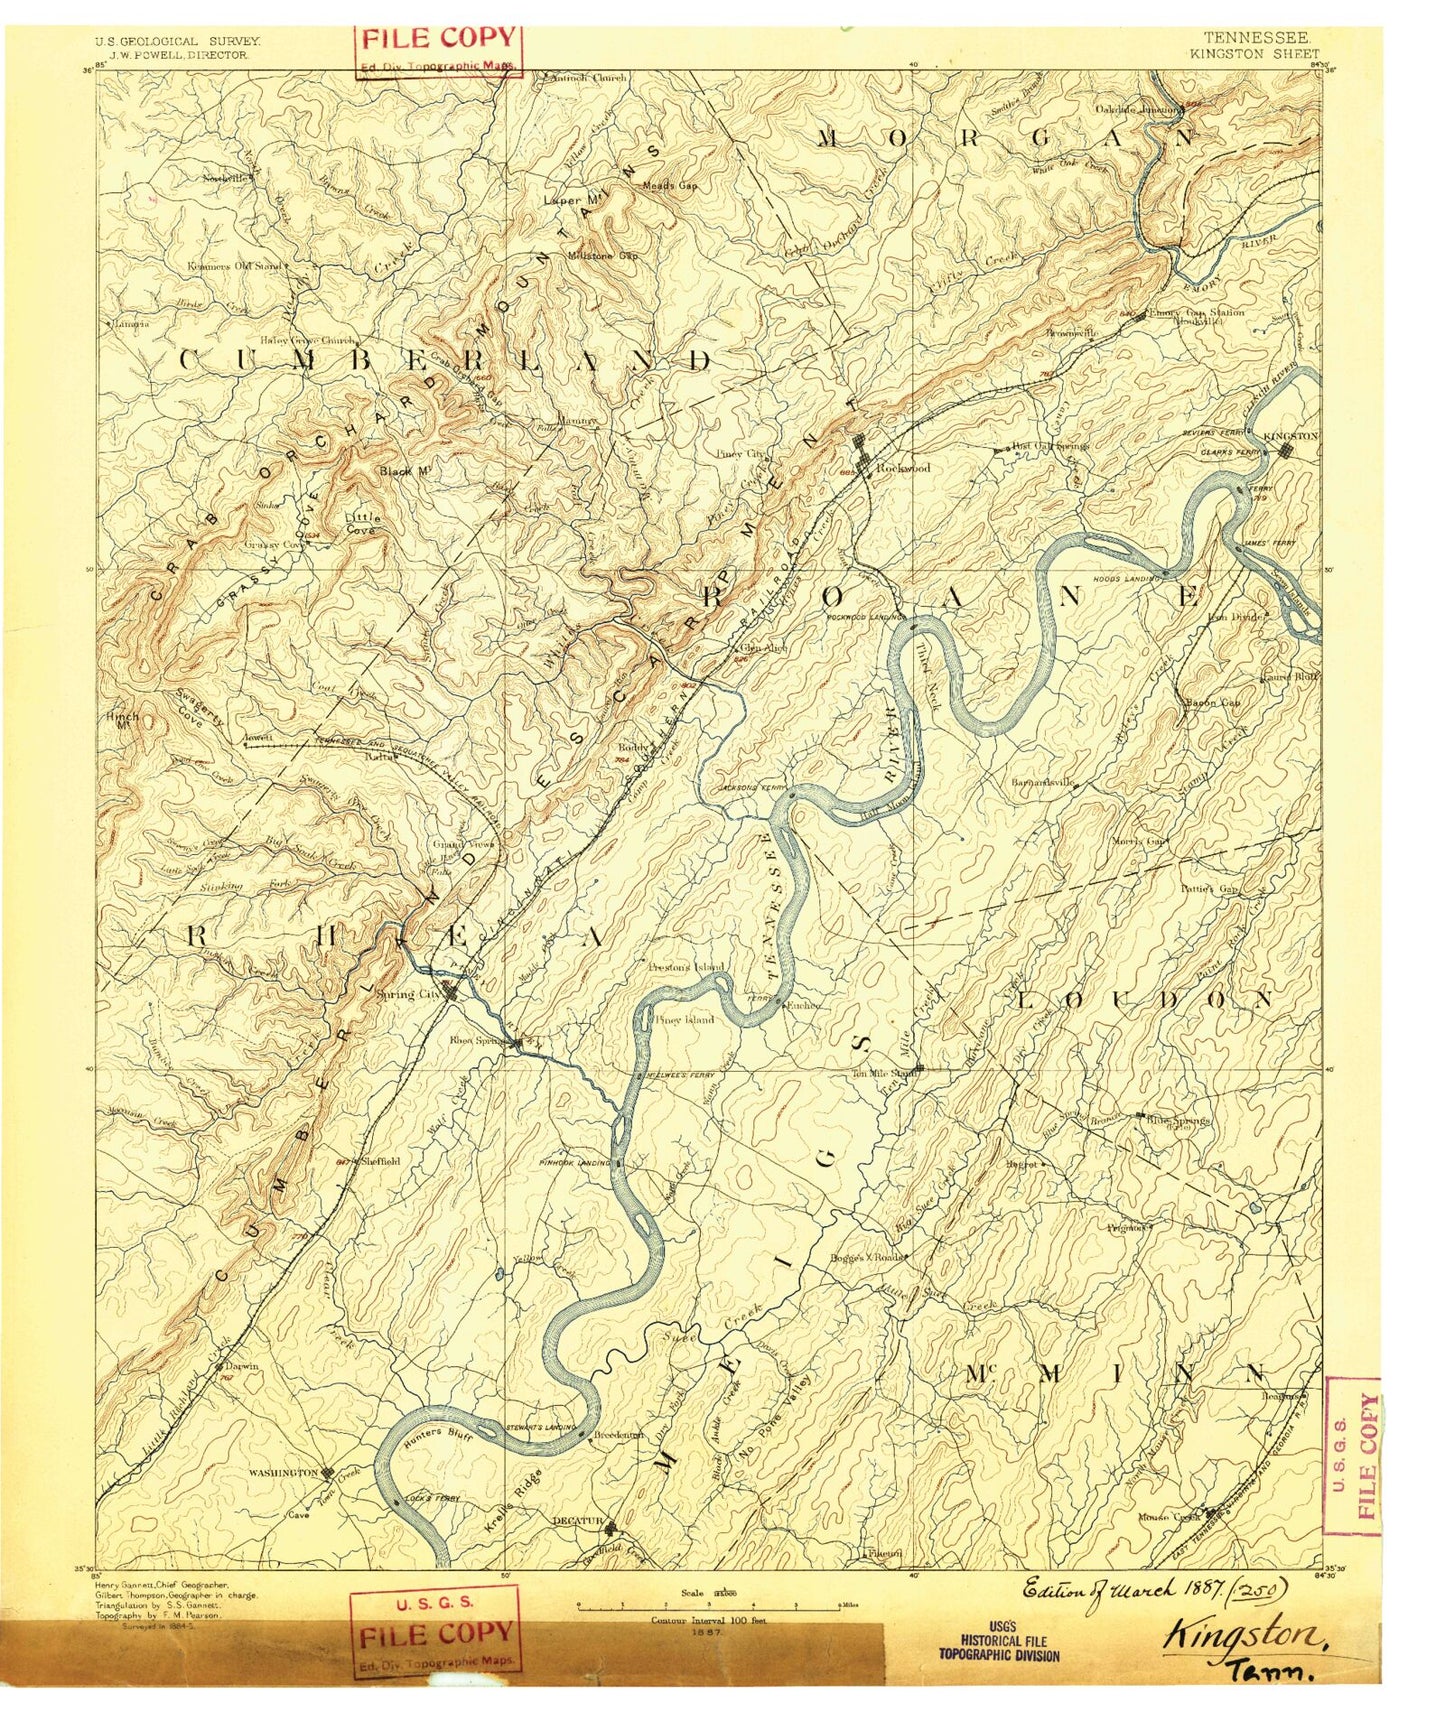 Historic 1887 Kingston Tennessee 30'x30' Topo Map Image